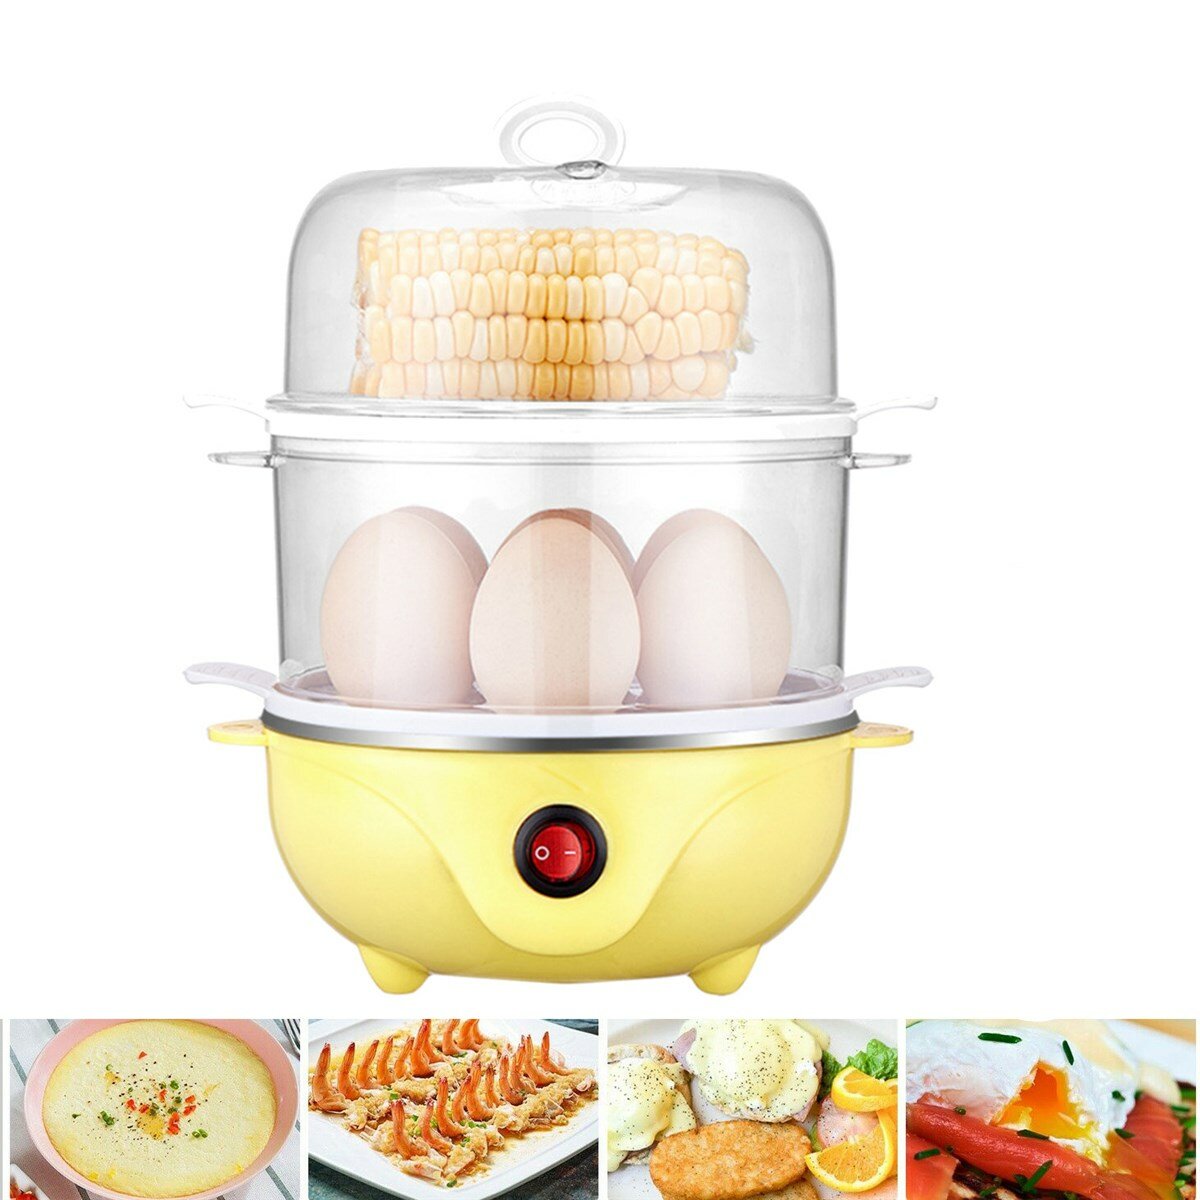 

Portable Egg Steamer Kitchenware Double Layer Electric Egg Cooker Boiler Heating Stainless Steel Steamer Pan Cooking Too